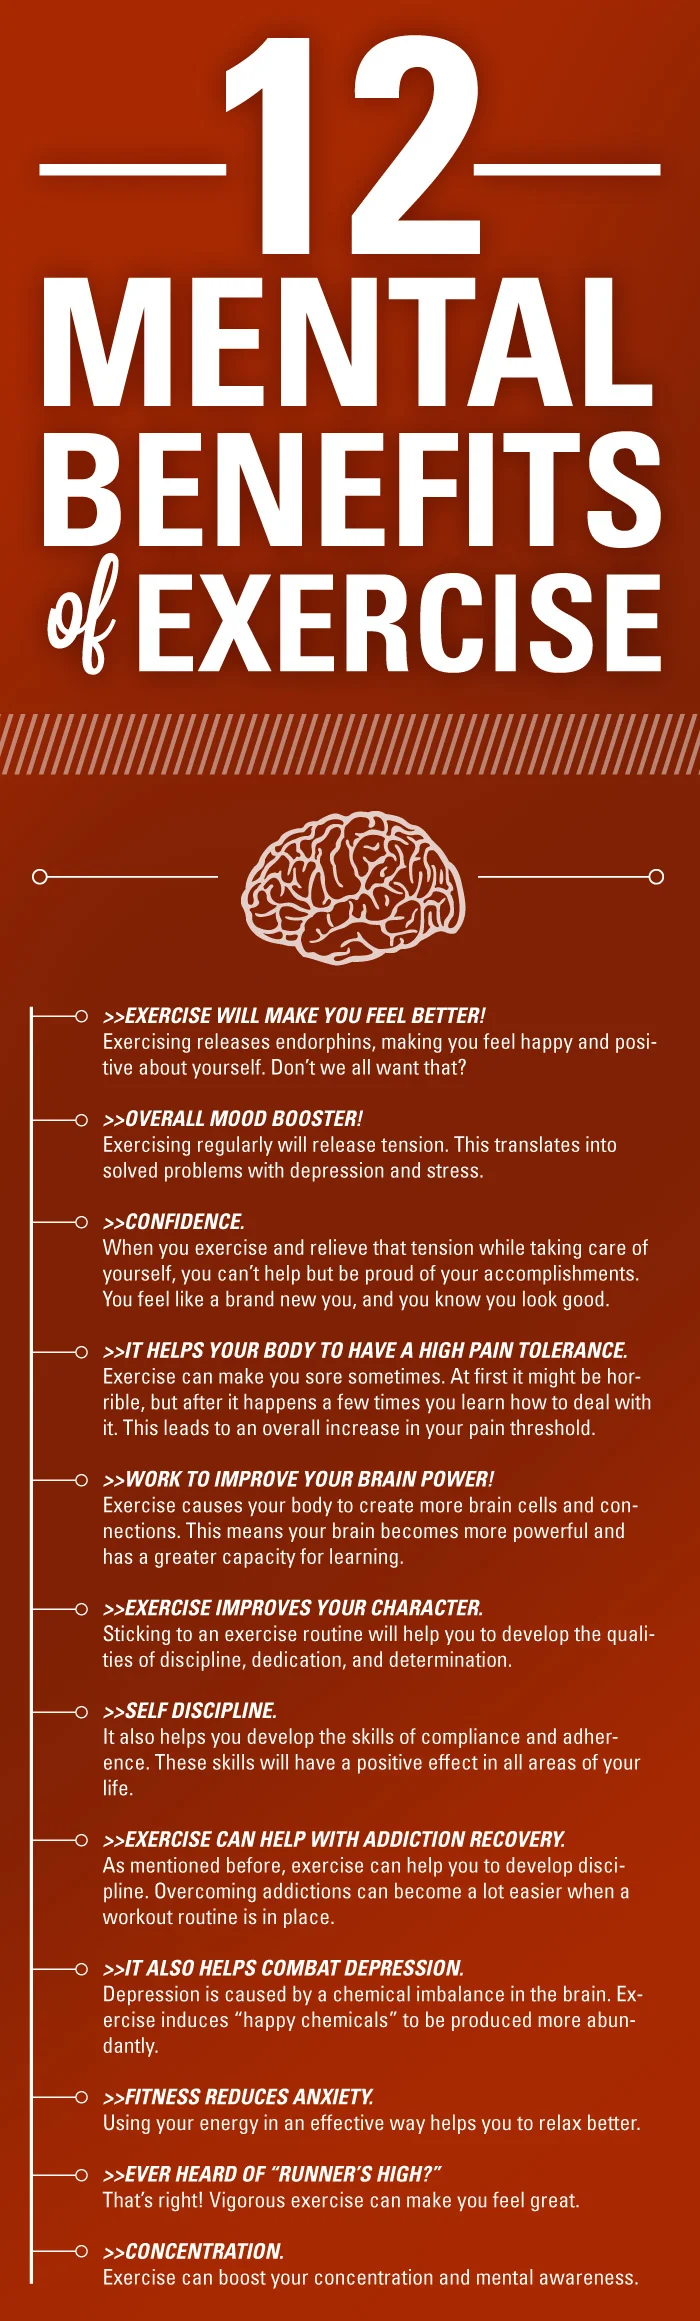 12 Mental Benefits of Exercise #Infographic